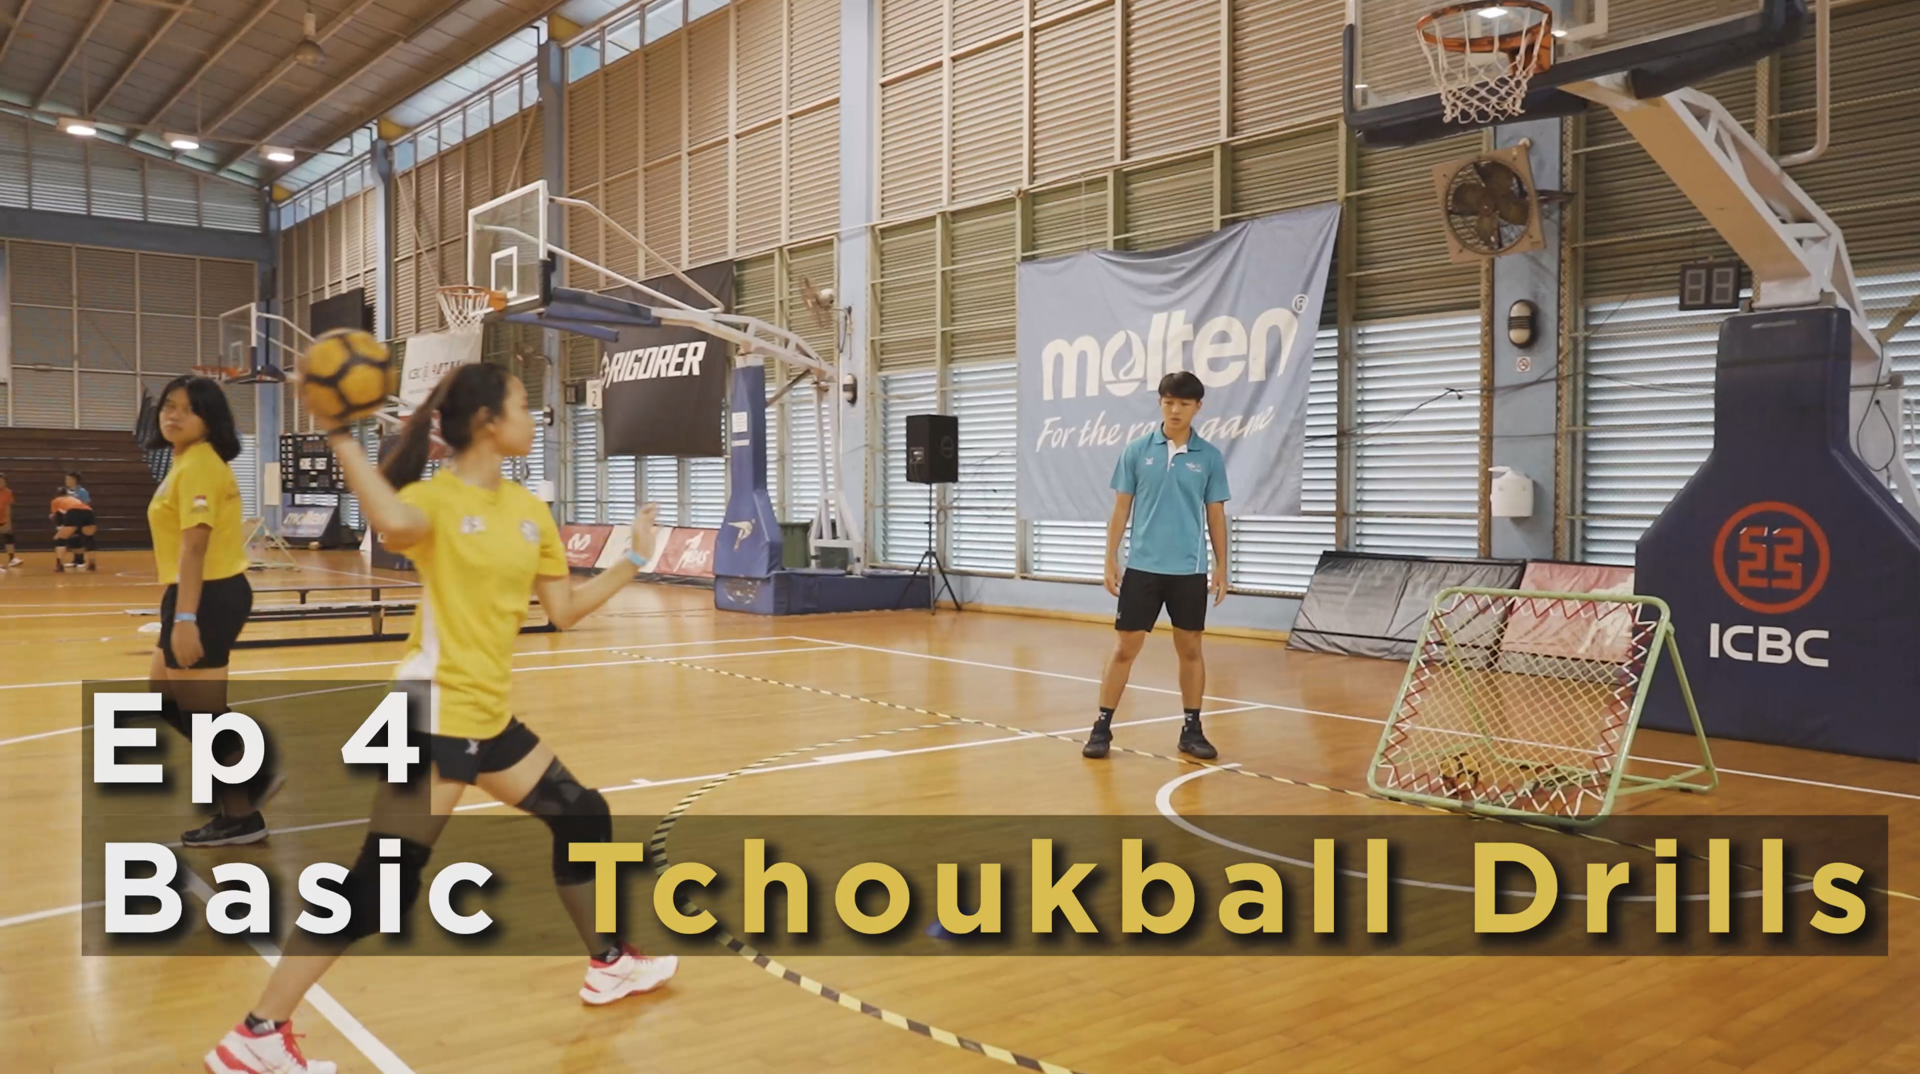 Ep 4 - Basic Team Techniques for Tchoukball